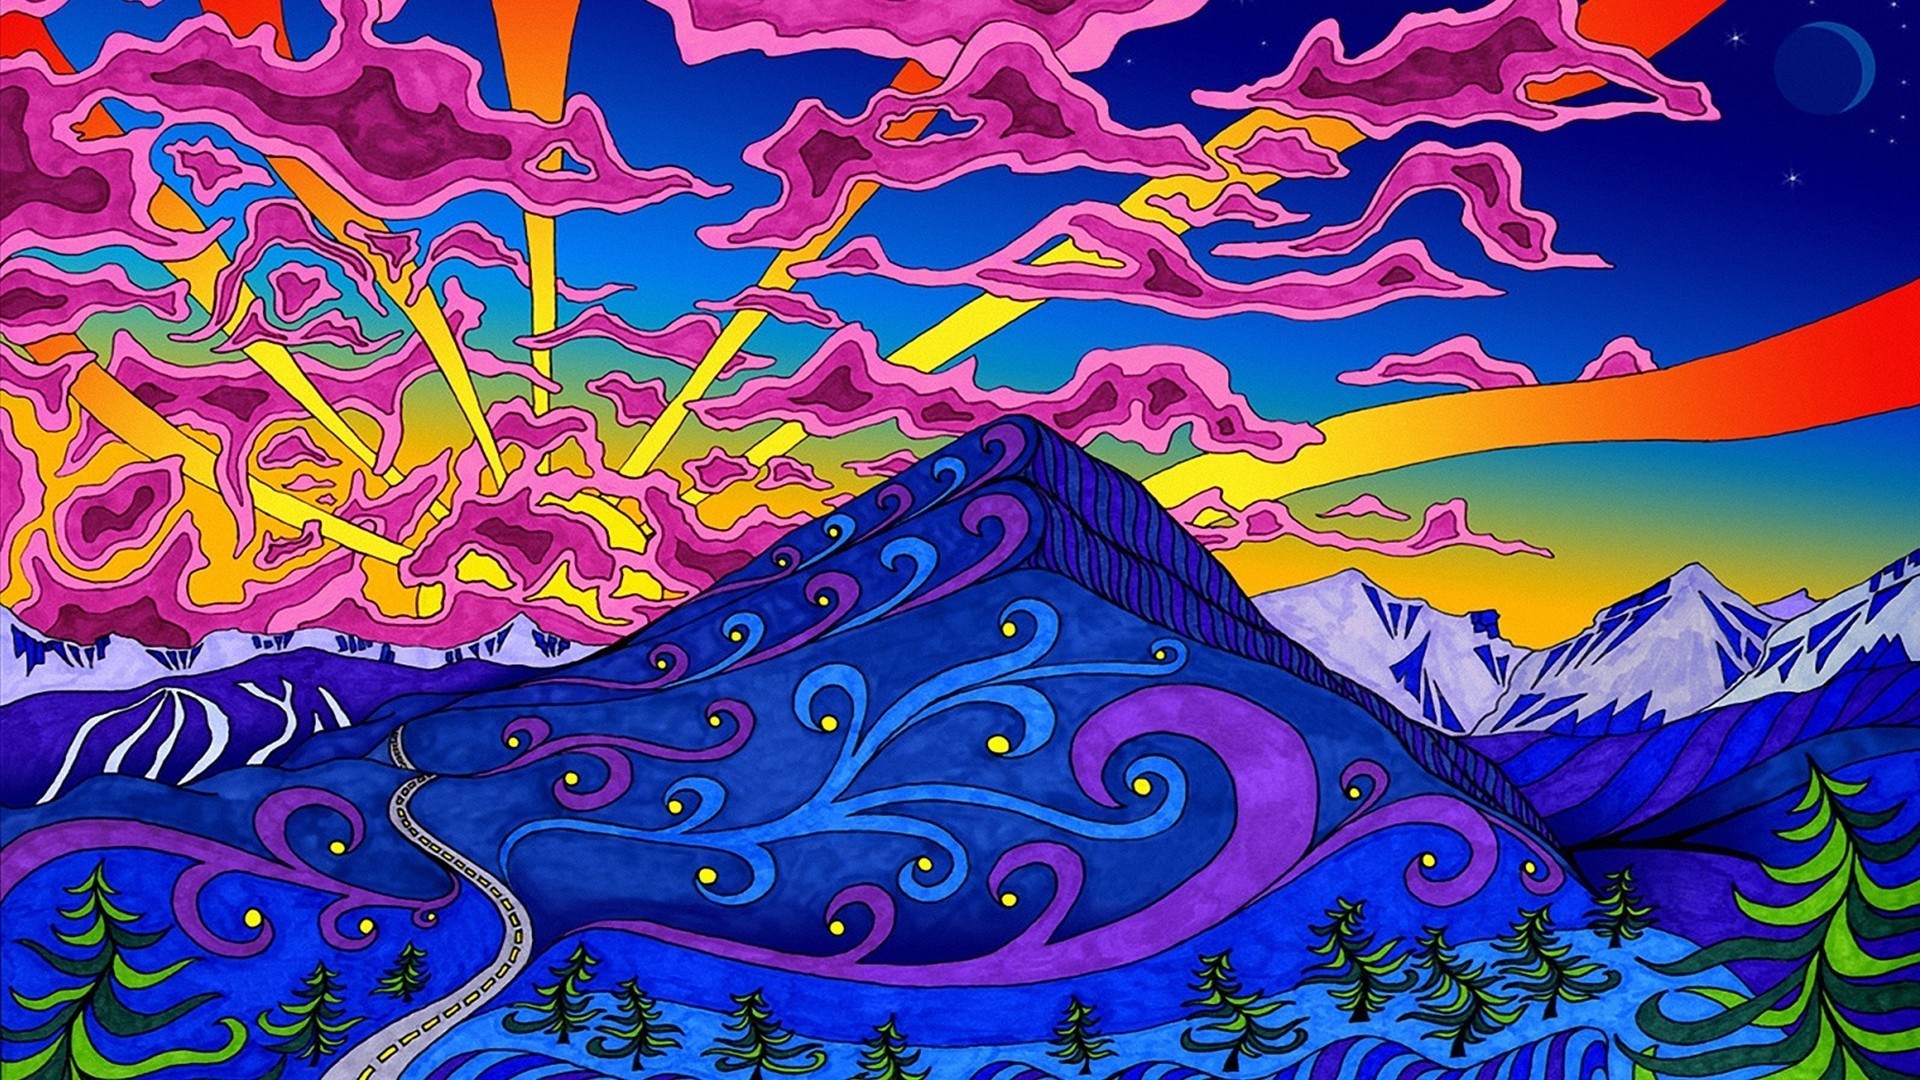 Psychedelic Wallpaper